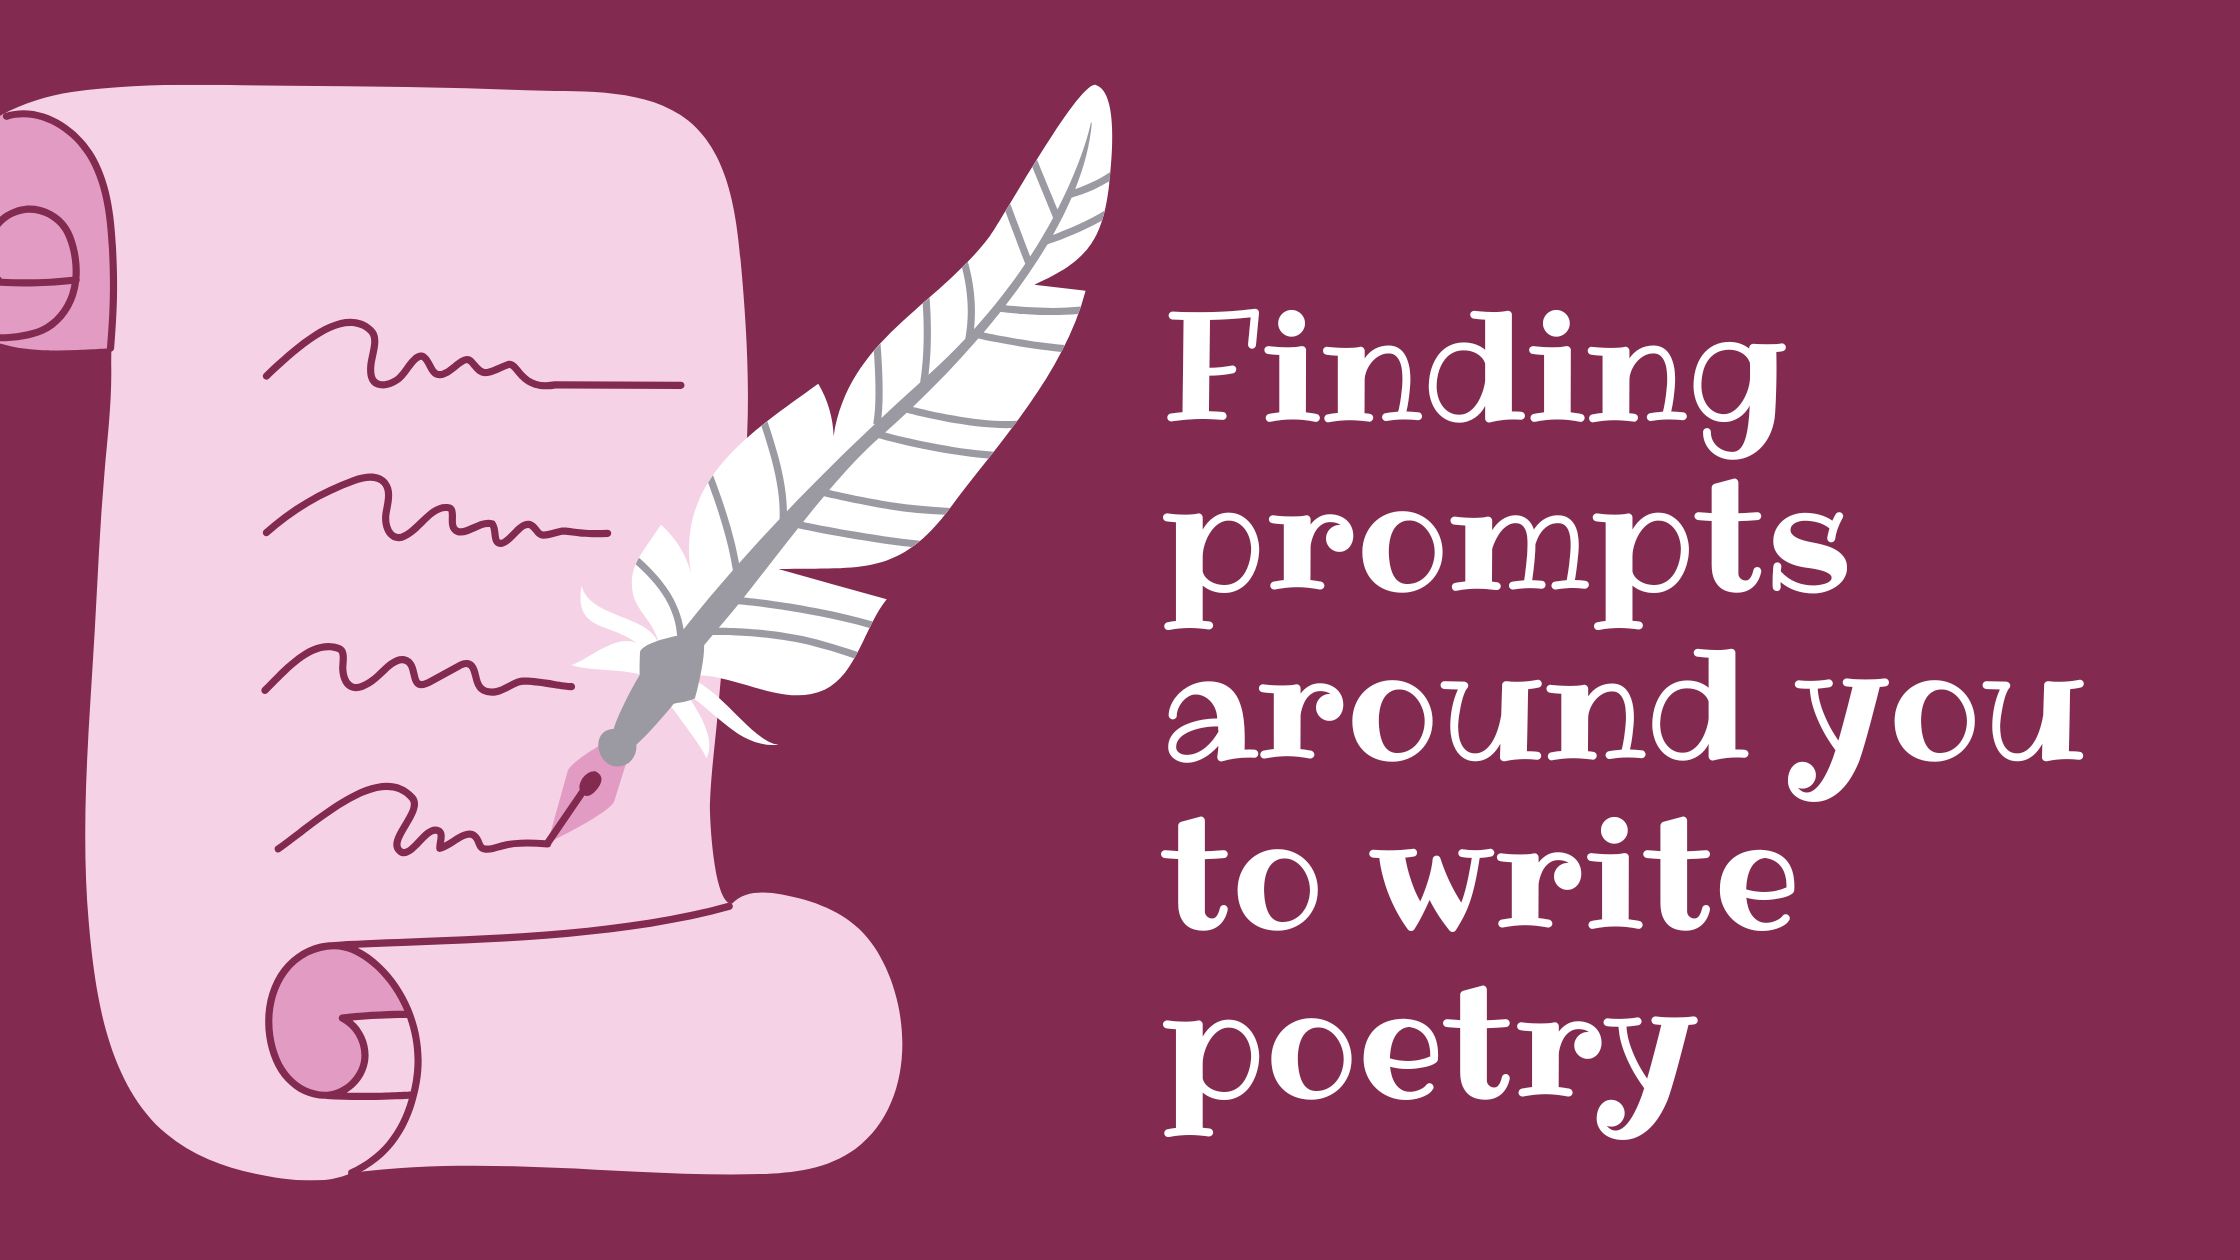 Finding prompts around you to write poetry